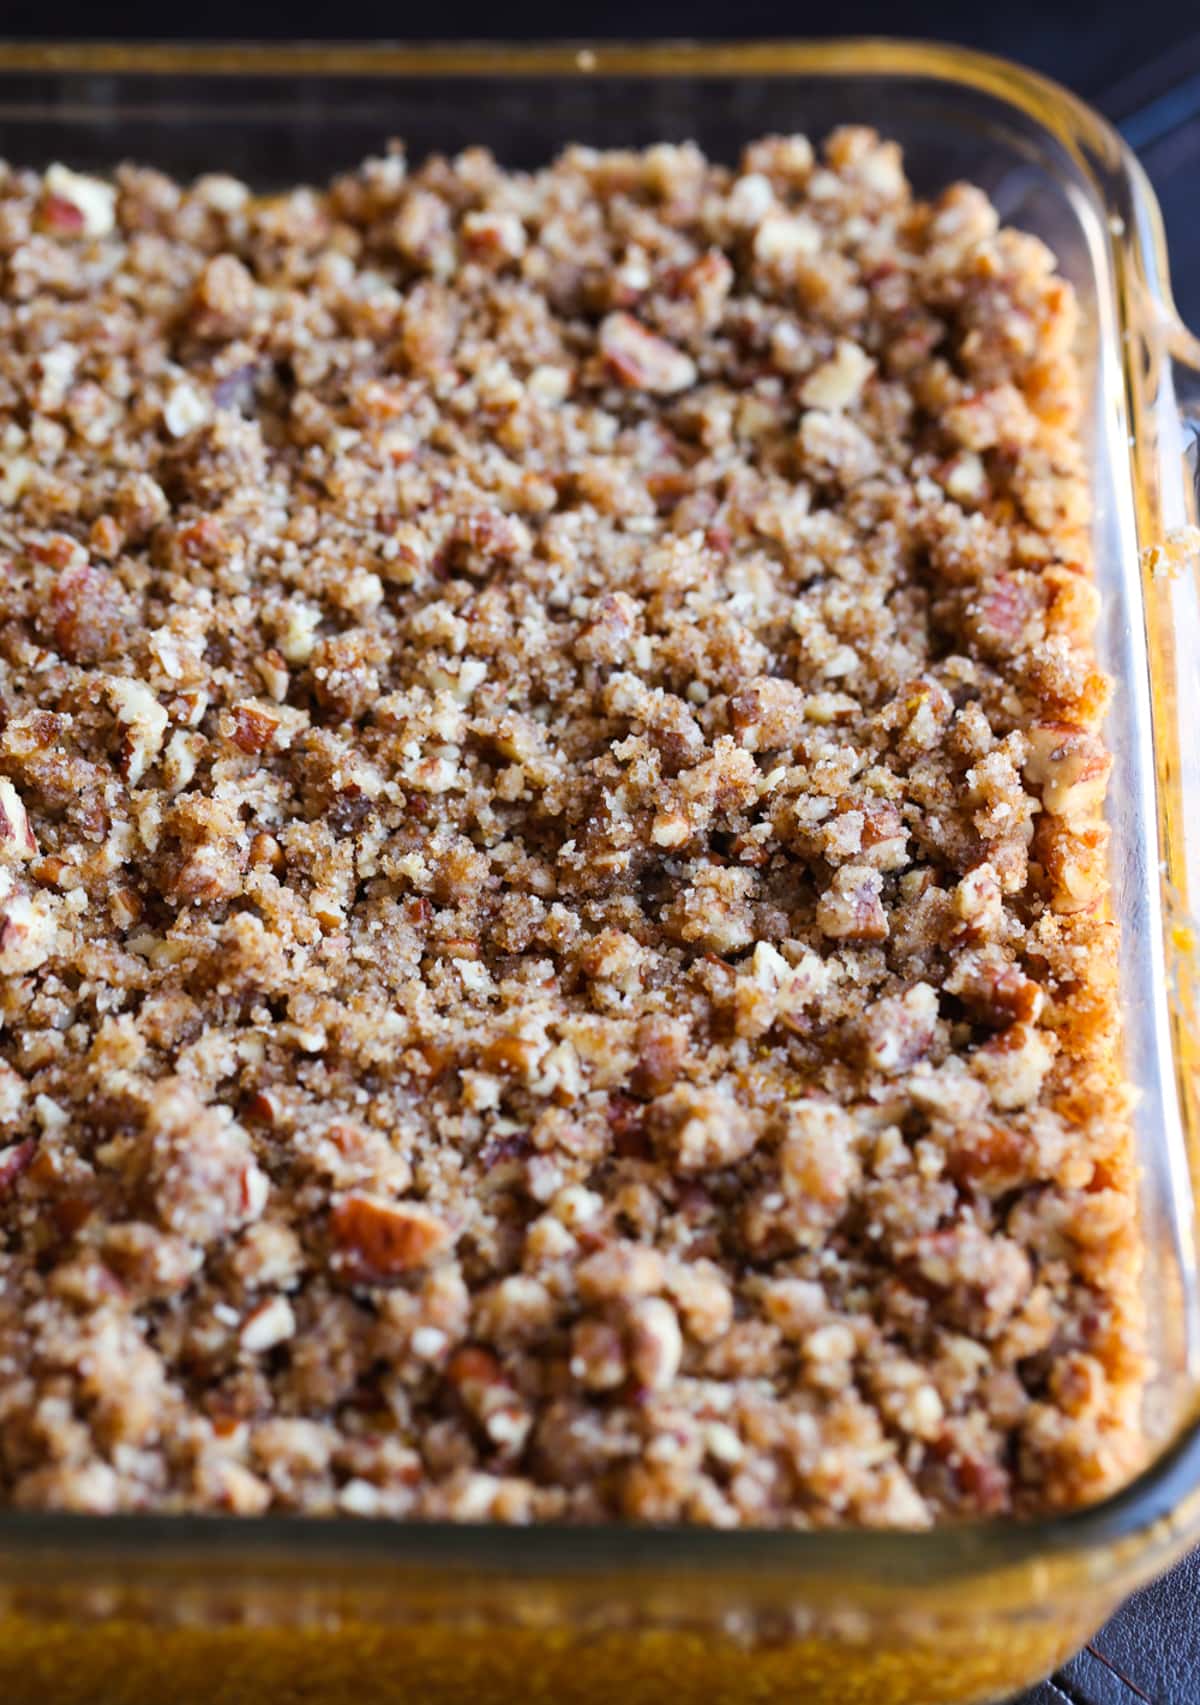 Unbaked sweet potato puree with a pecan streusel in a baking dish.